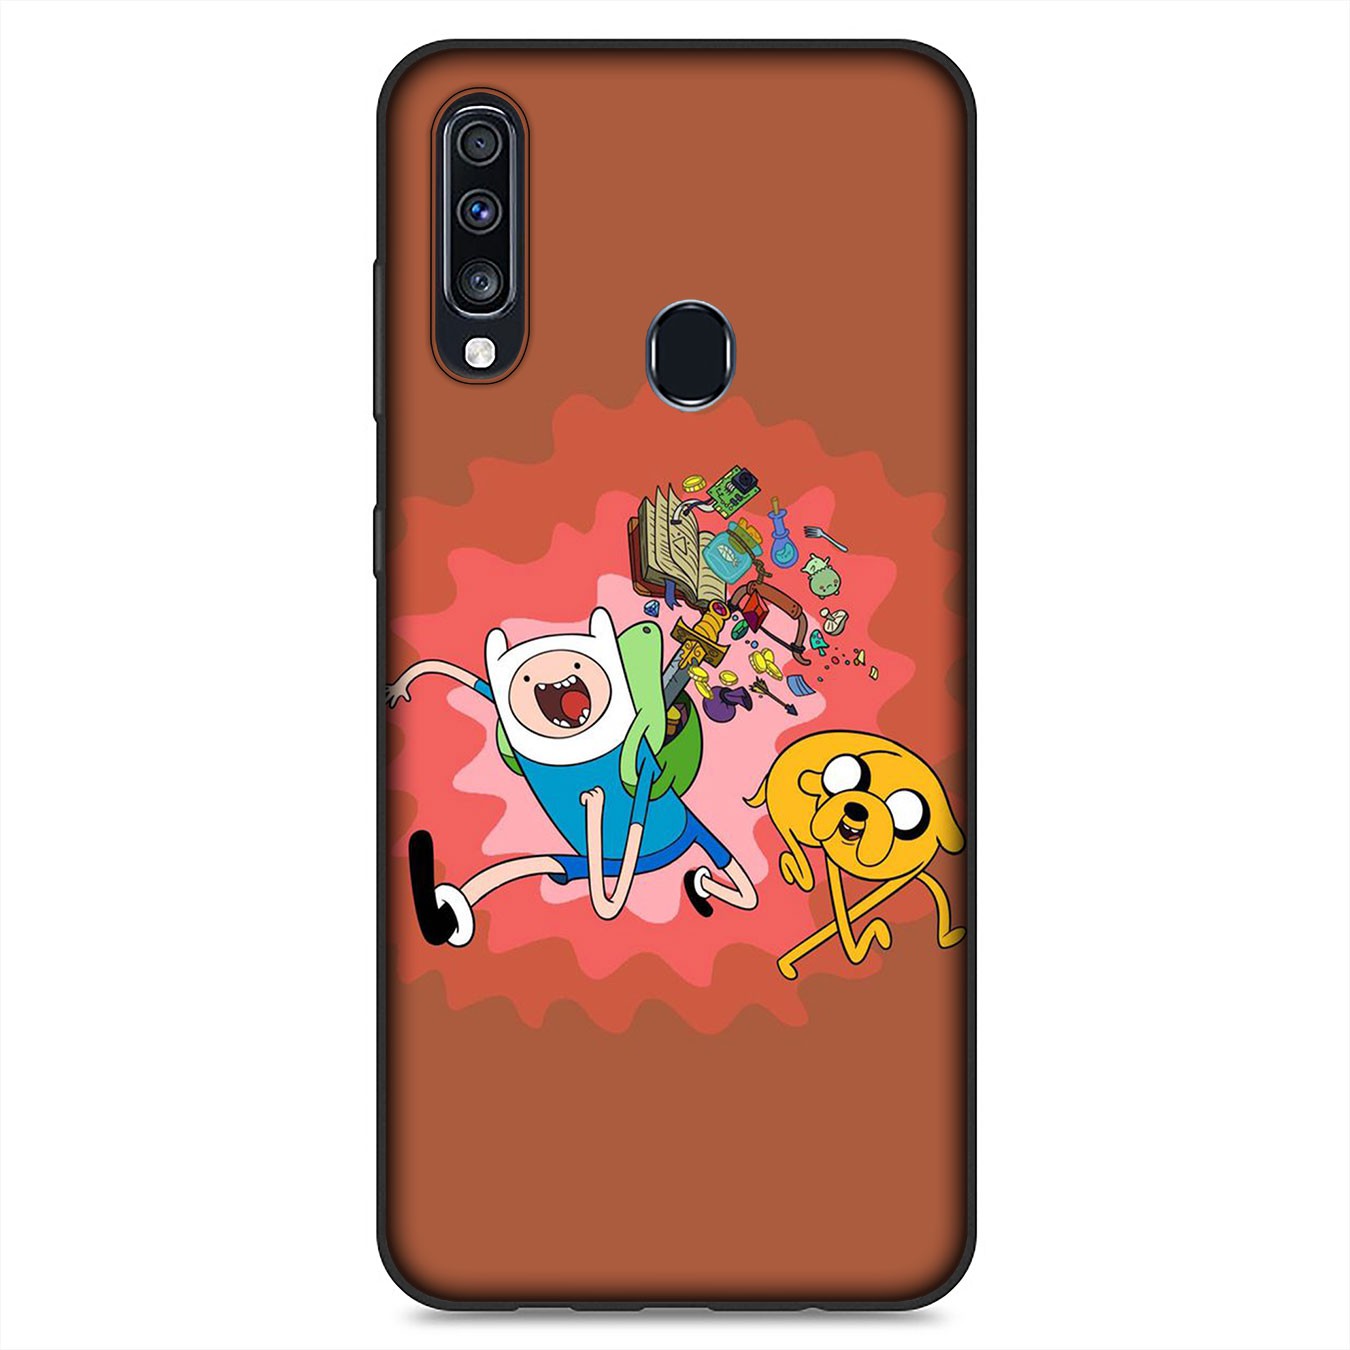 Samsung Galaxy S9 S10 S20 FE Ultra Plus Lite S20+ S9+ S10+ S20Plus Casing Soft Silicone Phone Case Anime  adventure time Cover